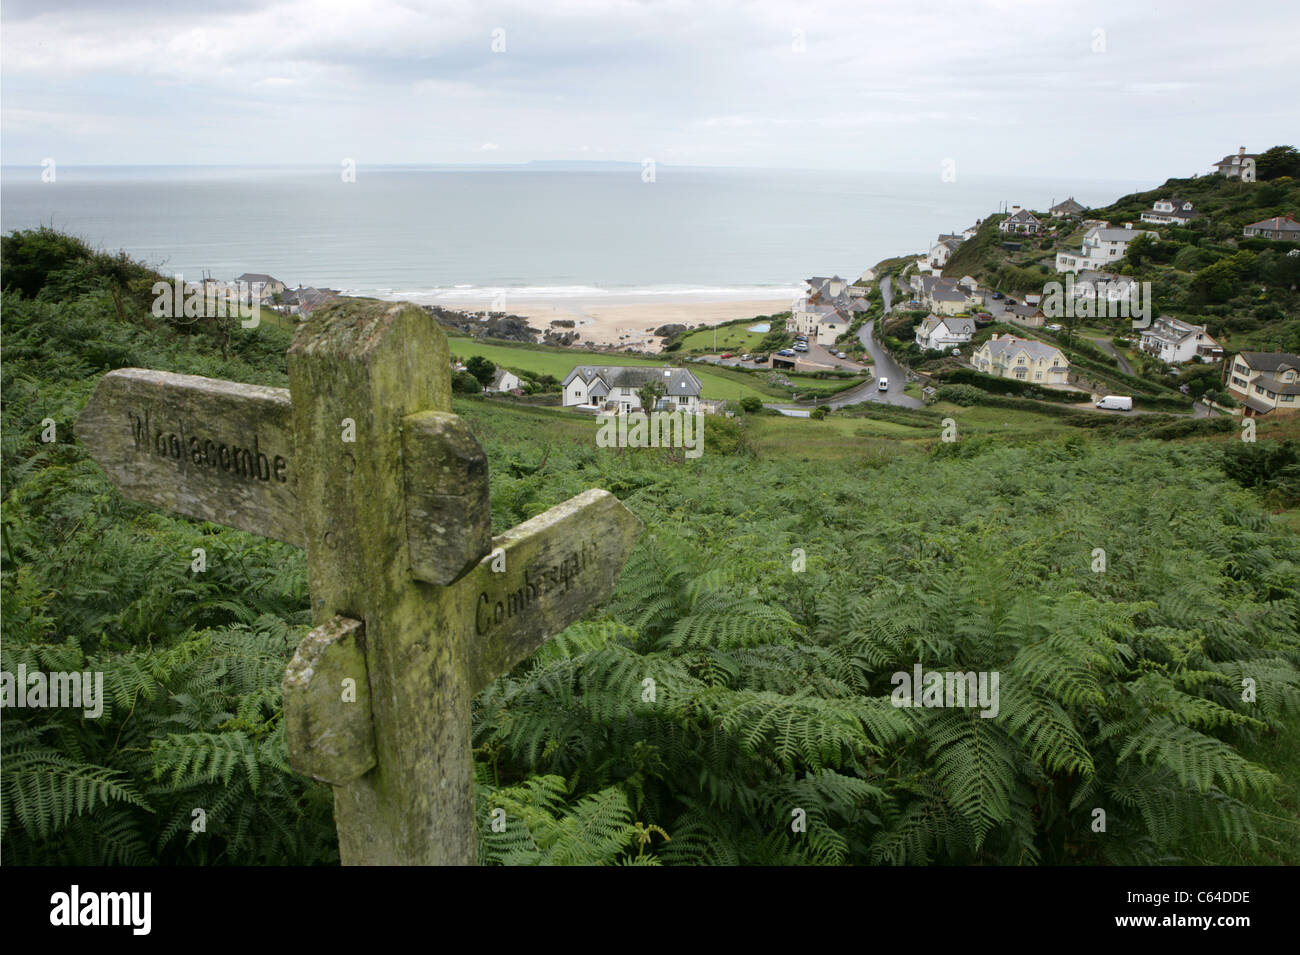 Location direction sign pointing to Woolacombe and  Combesgate overlooking Mortehoe beach in North Devon. A popular West Country holiday destination. Stock Photo